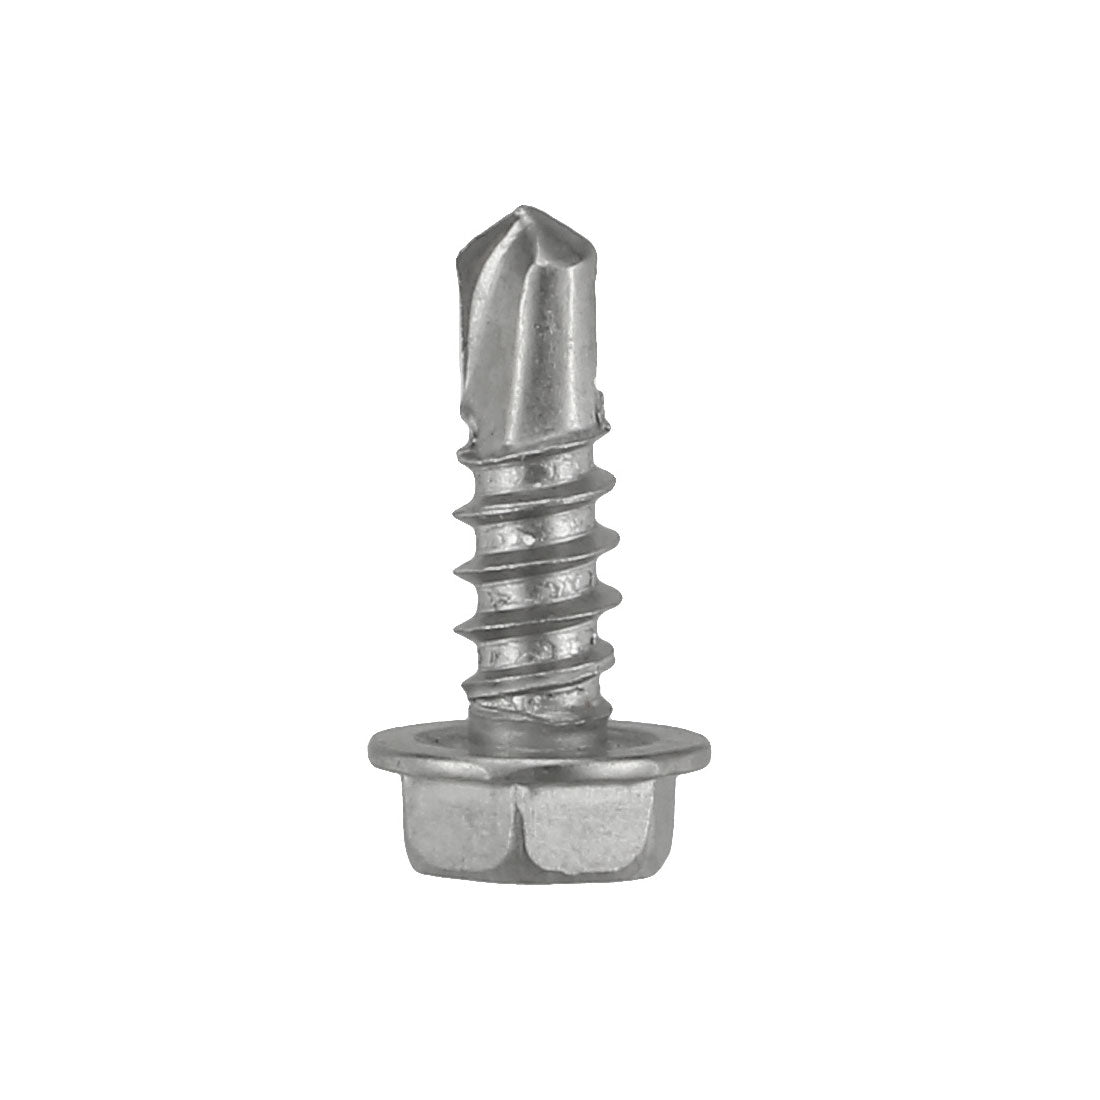 uxcell Uxcell M4.2x13mm 410 Stainless Steel Self Tapping Drilling Hex Flange Bolt 50pcs